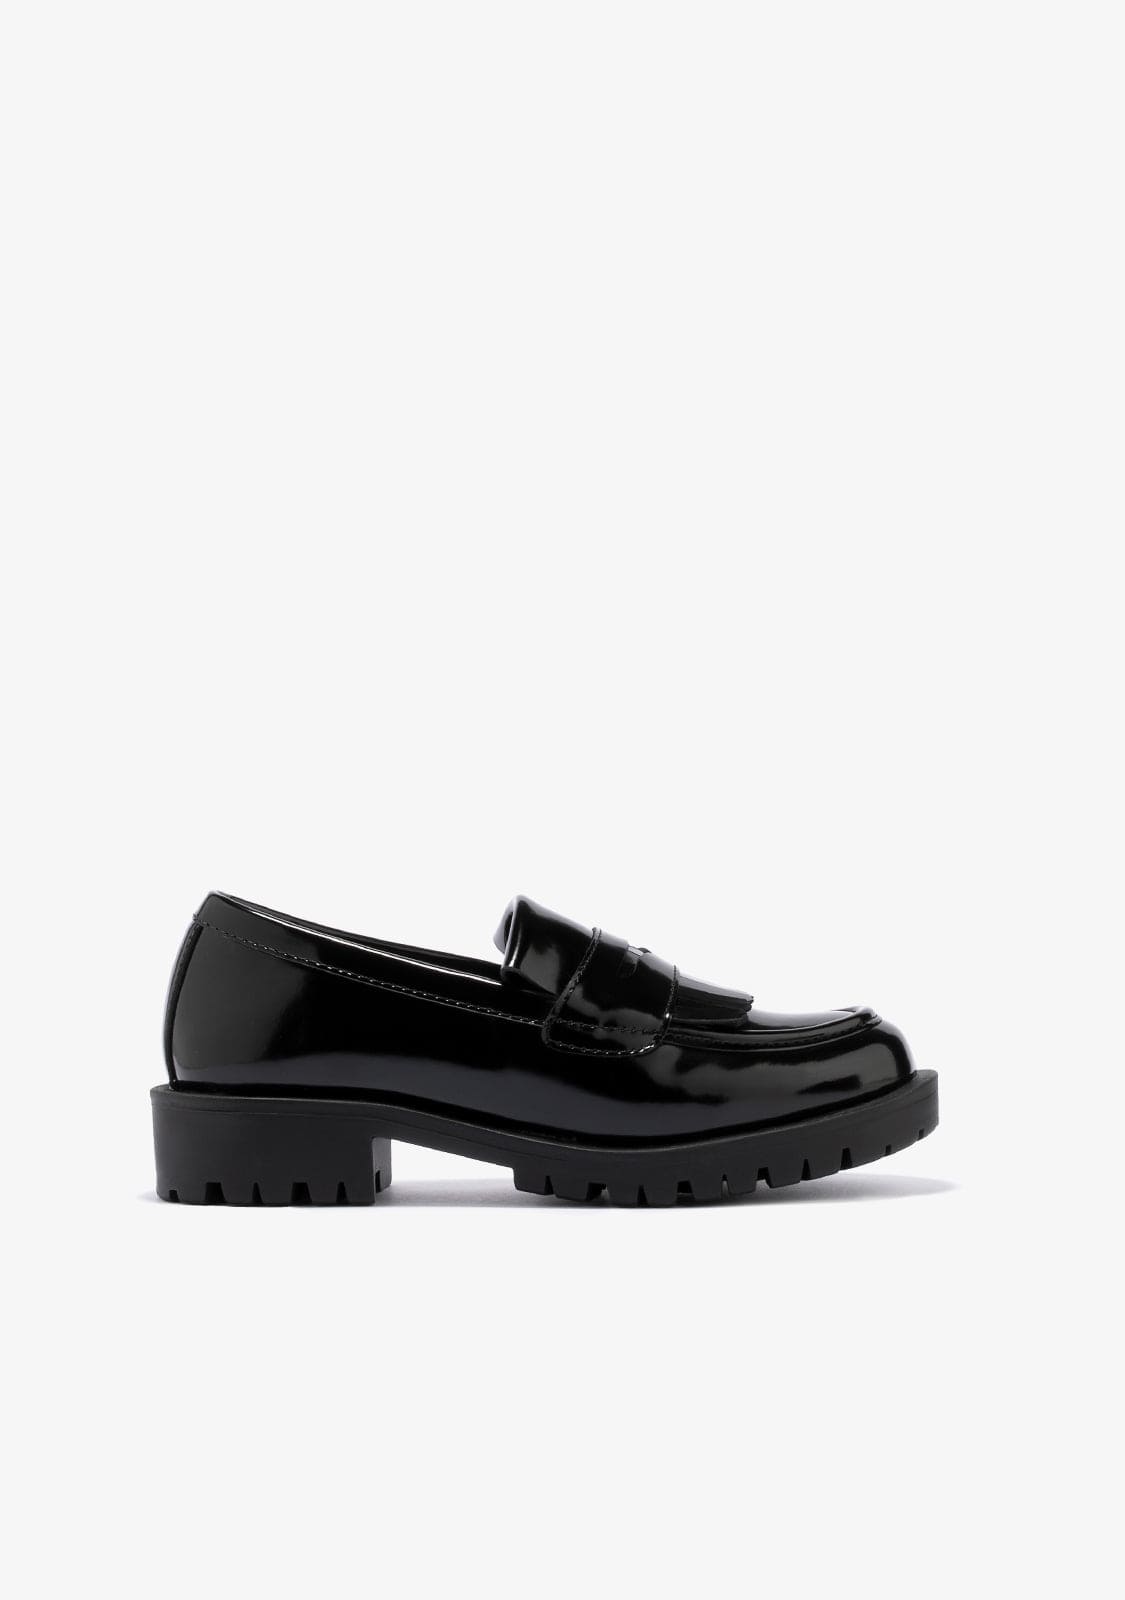 B&W JUNIOR Shoes Girl's Black Straps Loafers B&W